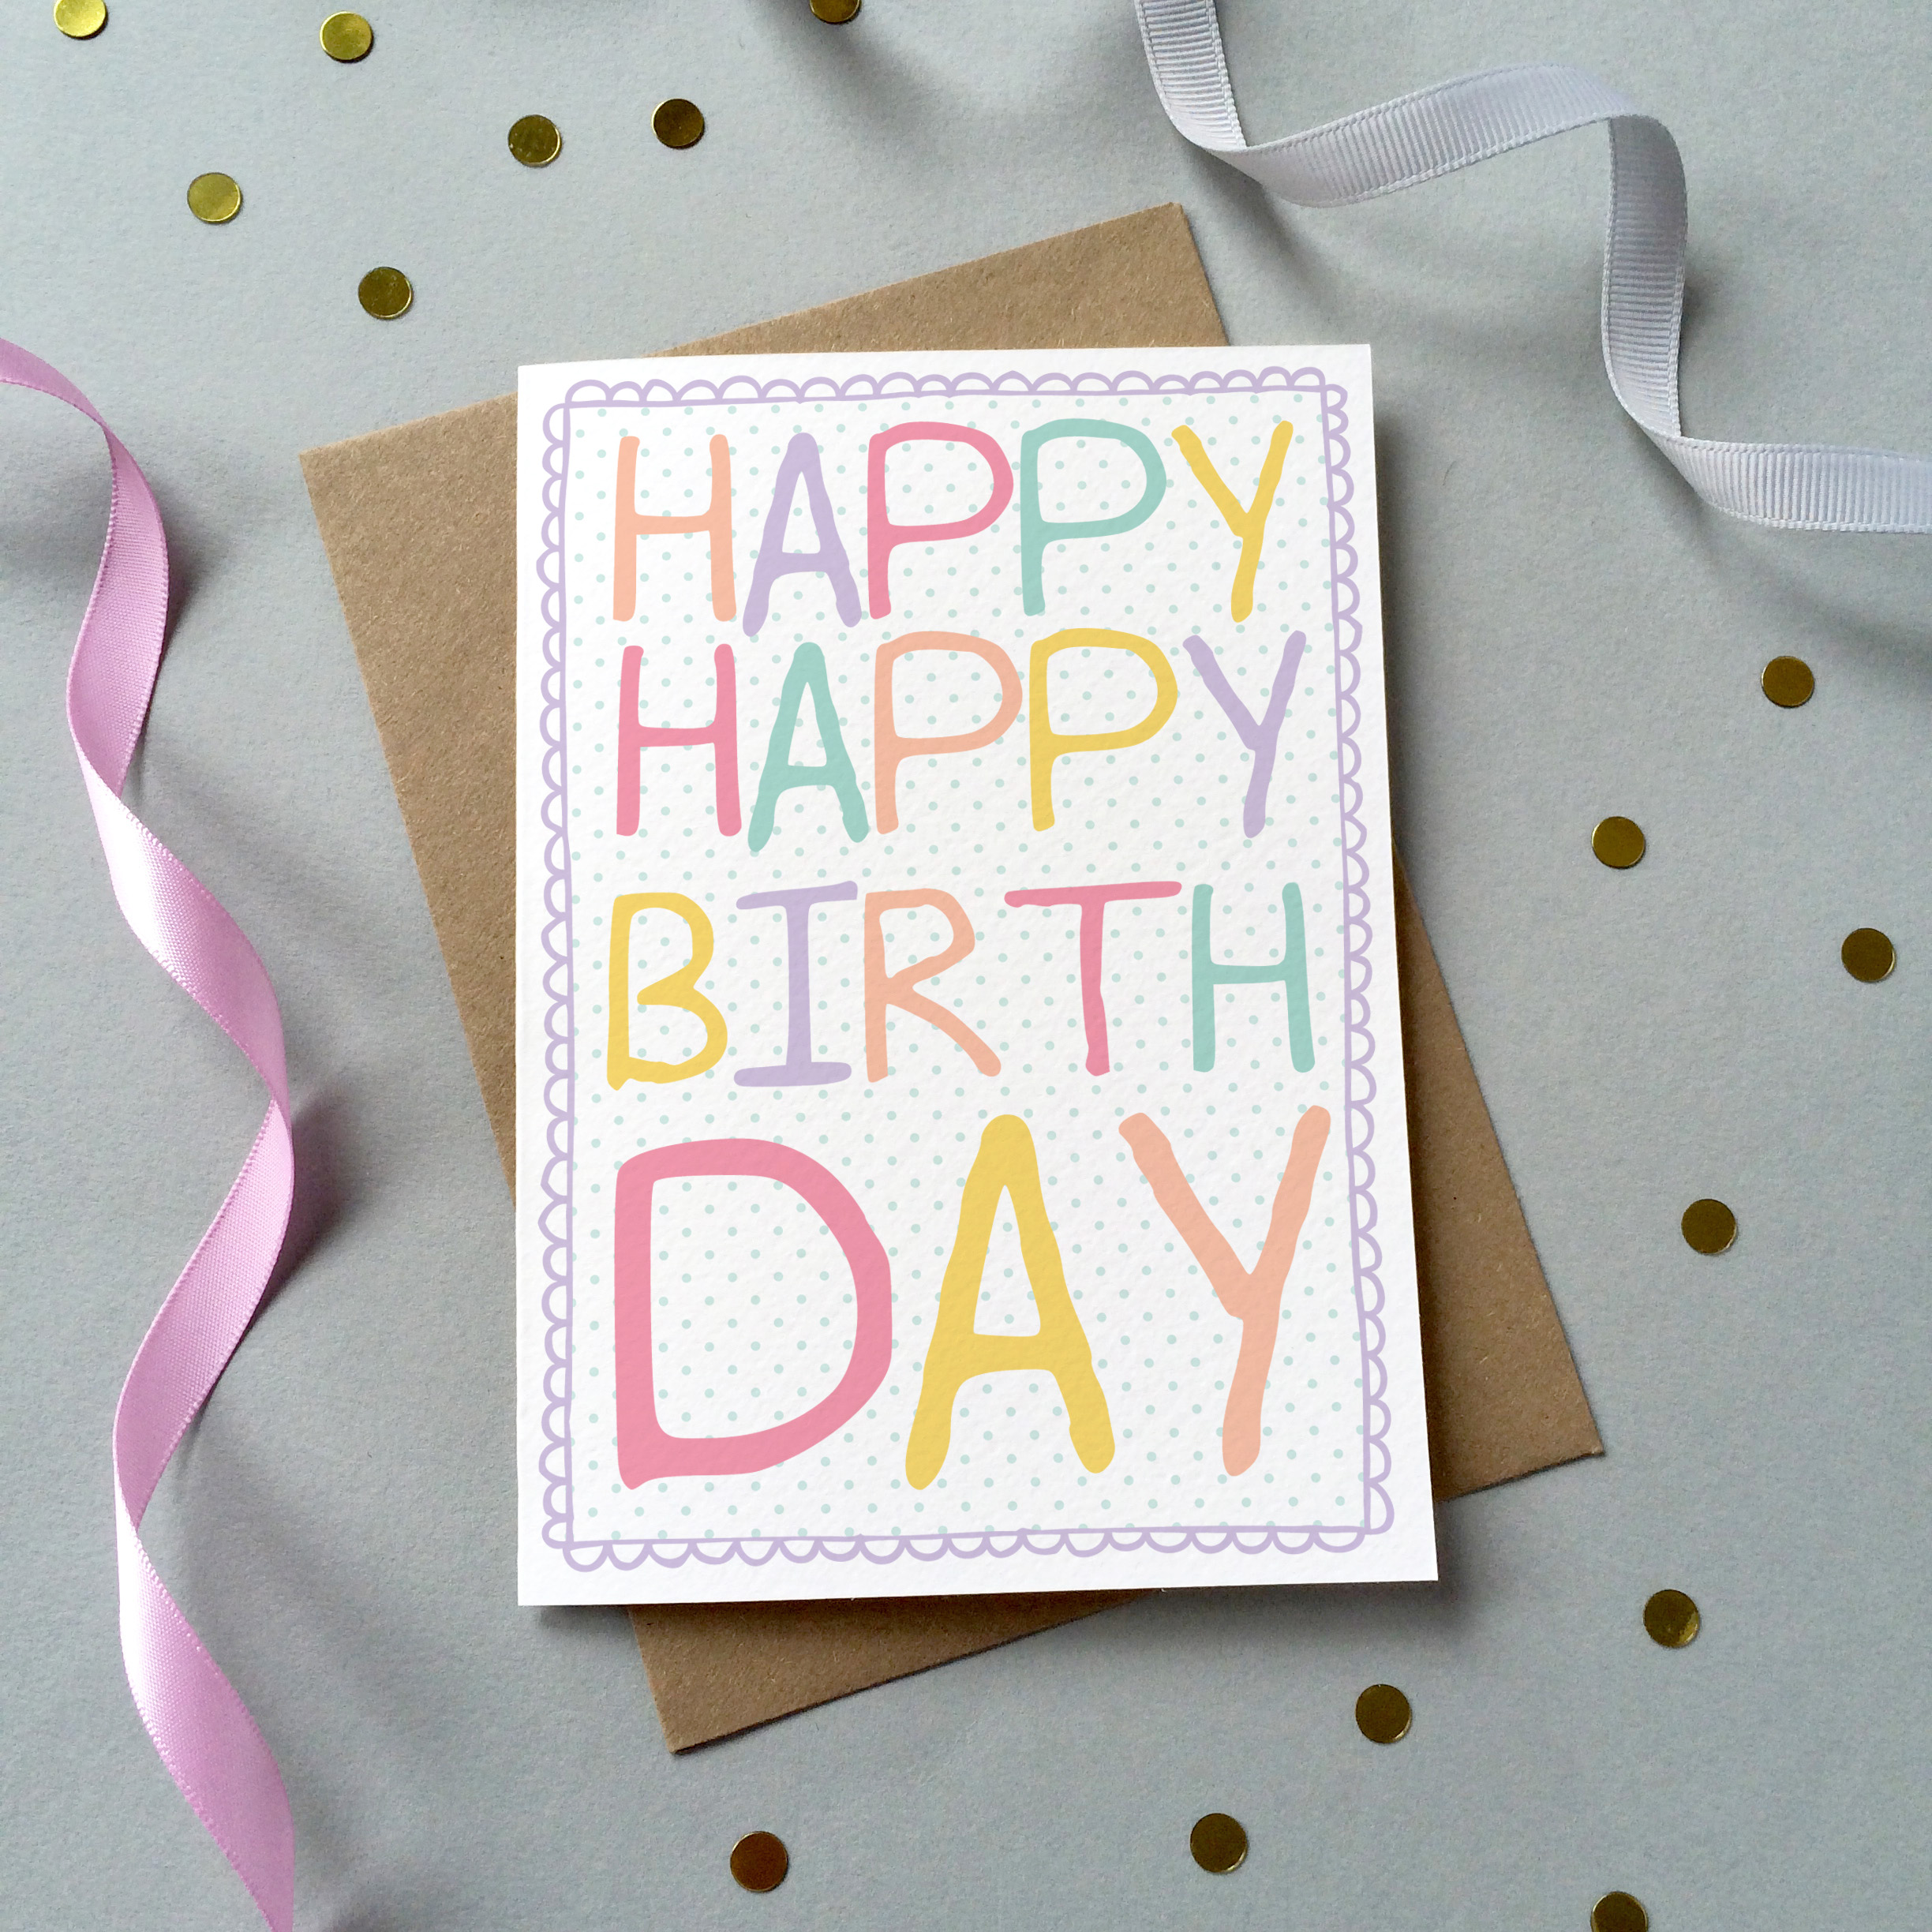 Happy Happy Birthday Single Card | Free Delivery when you spend £10 ...